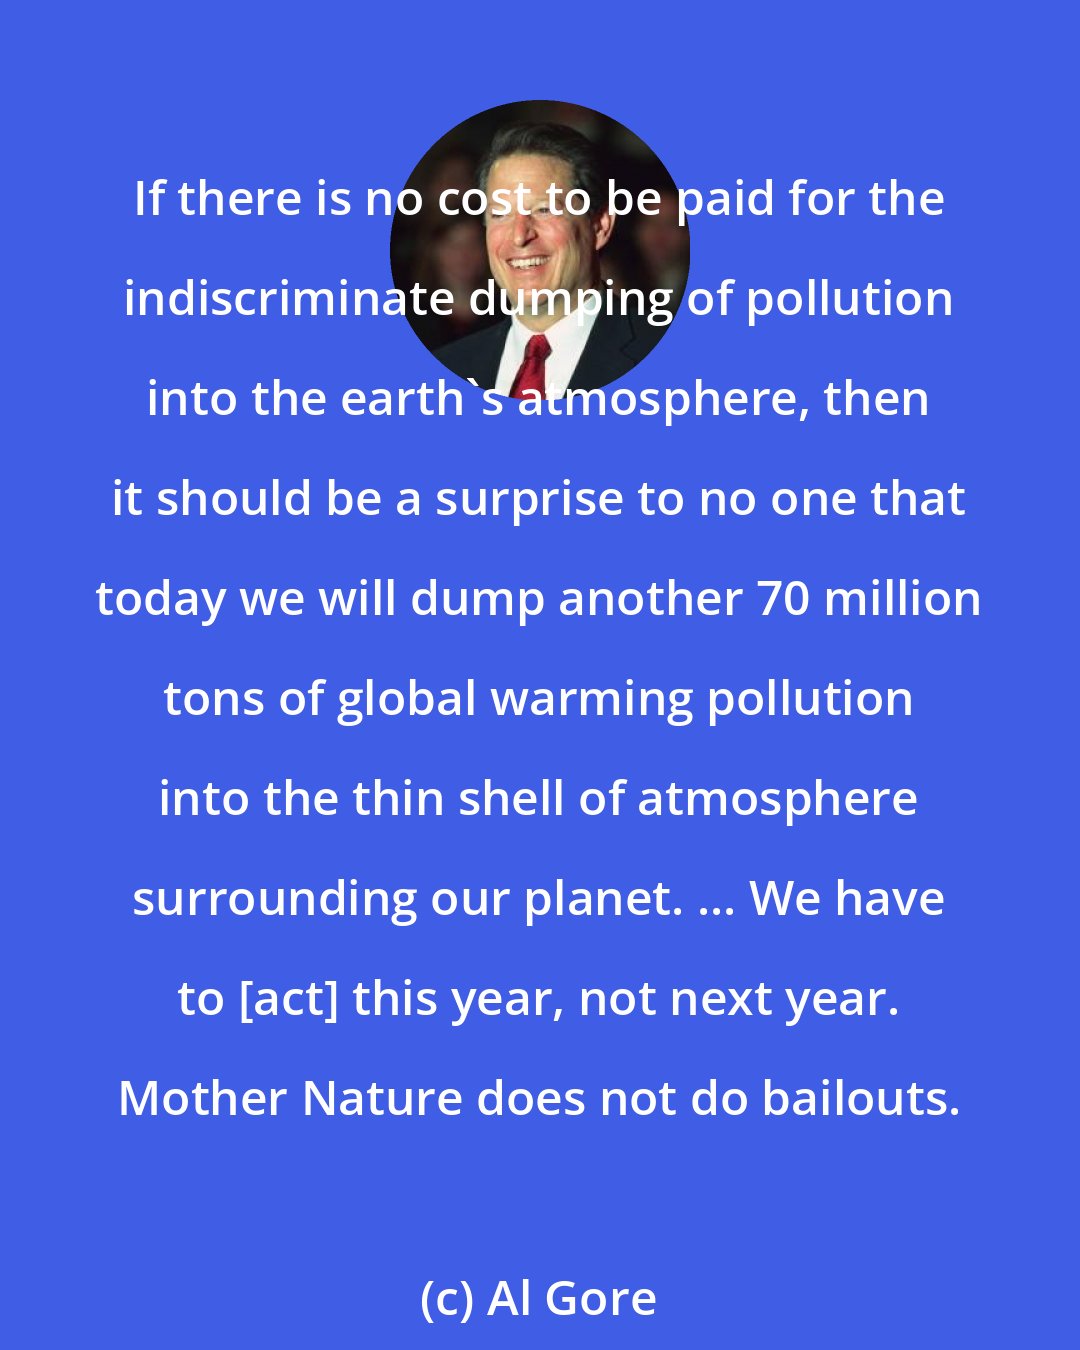 Al Gore: If there is no cost to be paid for the indiscriminate dumping of pollution into the earth's atmosphere, then it should be a surprise to no one that today we will dump another 70 million tons of global warming pollution into the thin shell of atmosphere surrounding our planet. ... We have to [act] this year, not next year. Mother Nature does not do bailouts.